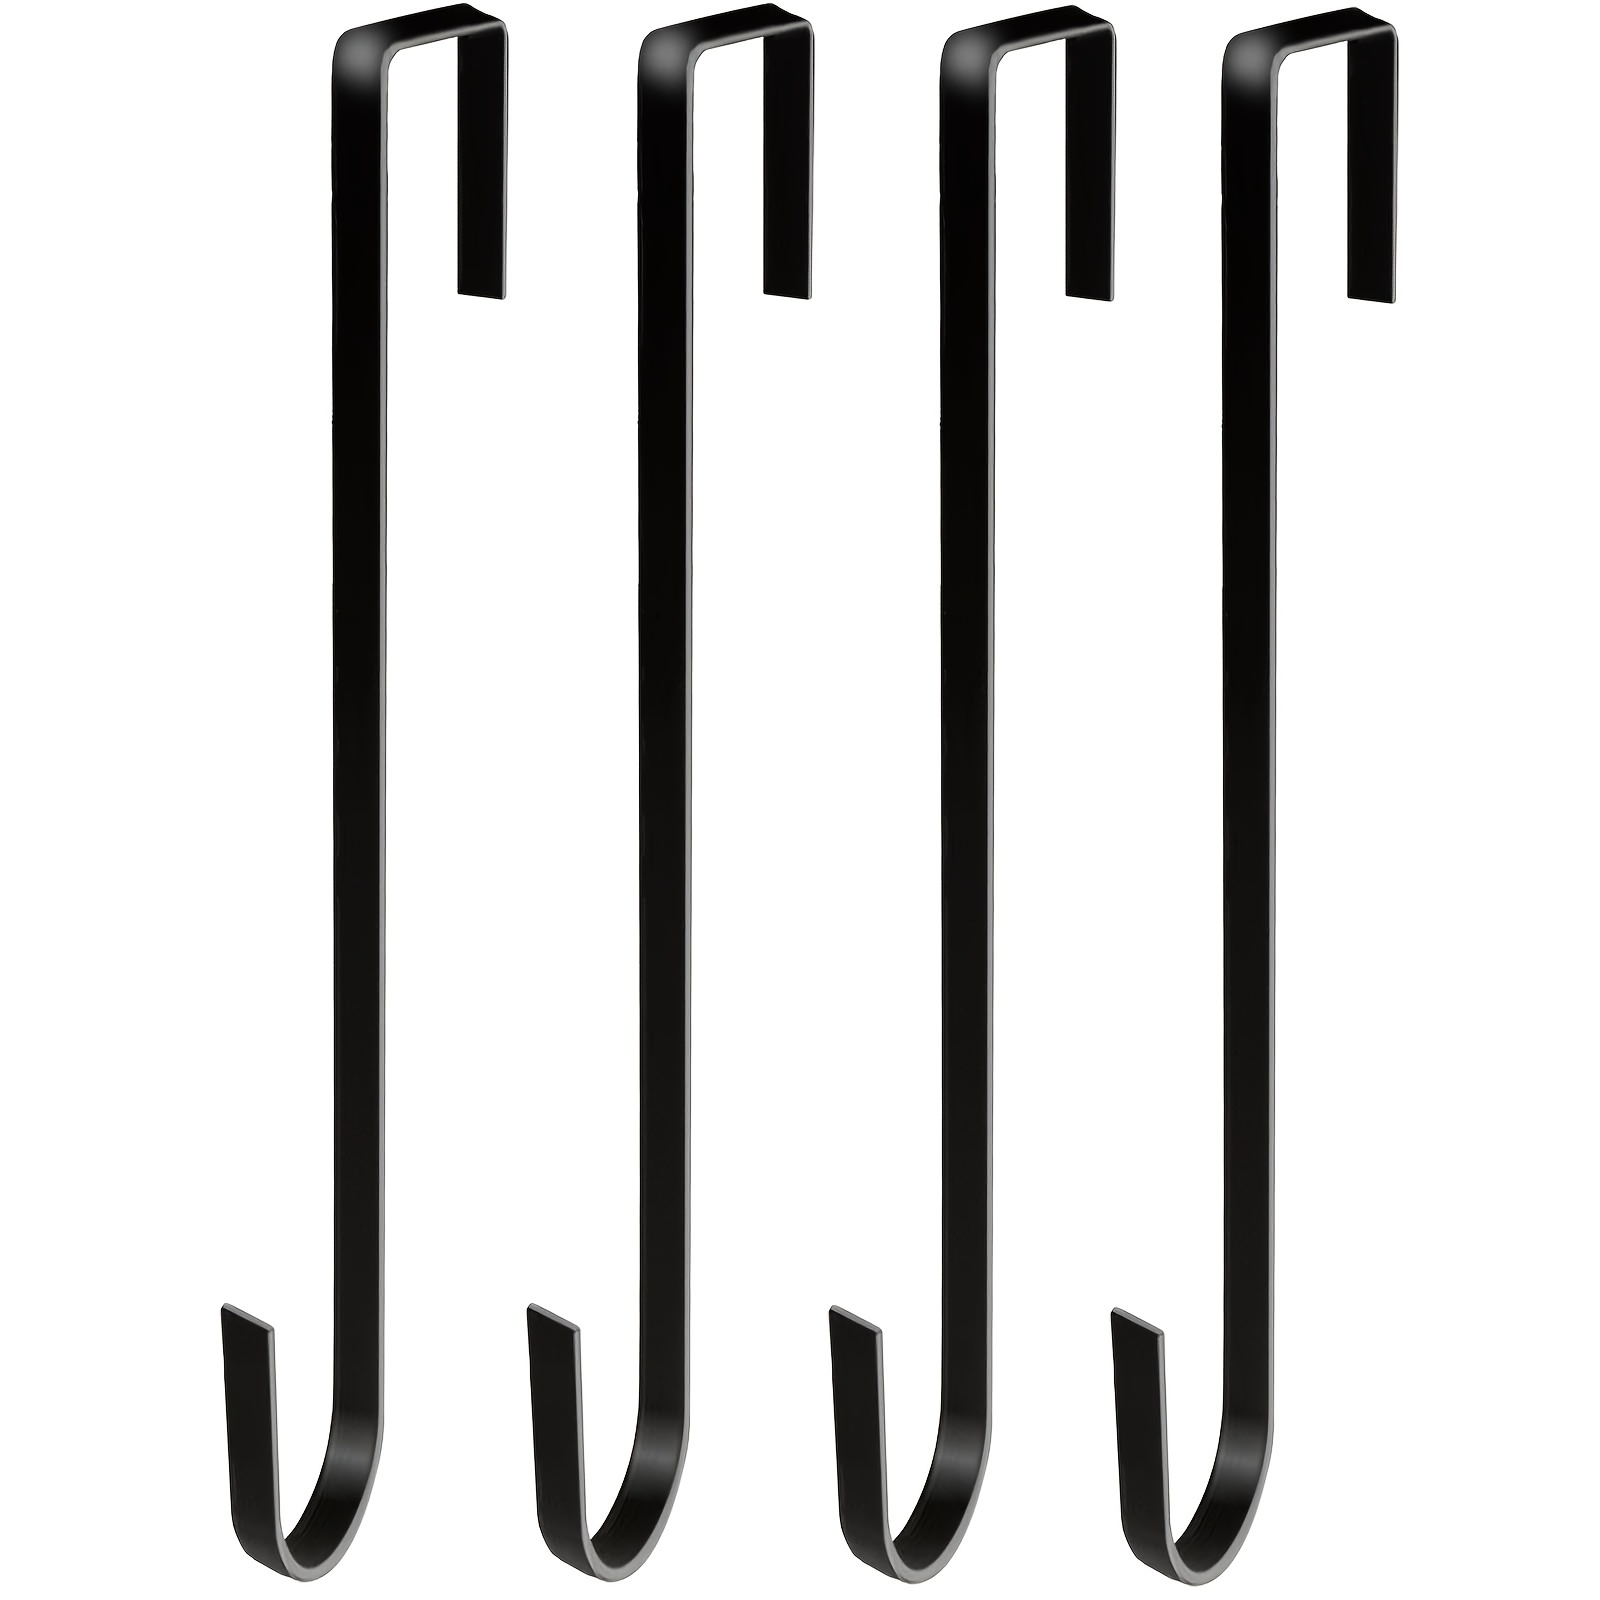 4 Pack of Pool Pole Hook Hangers for Fence Vinyl 12 Inch